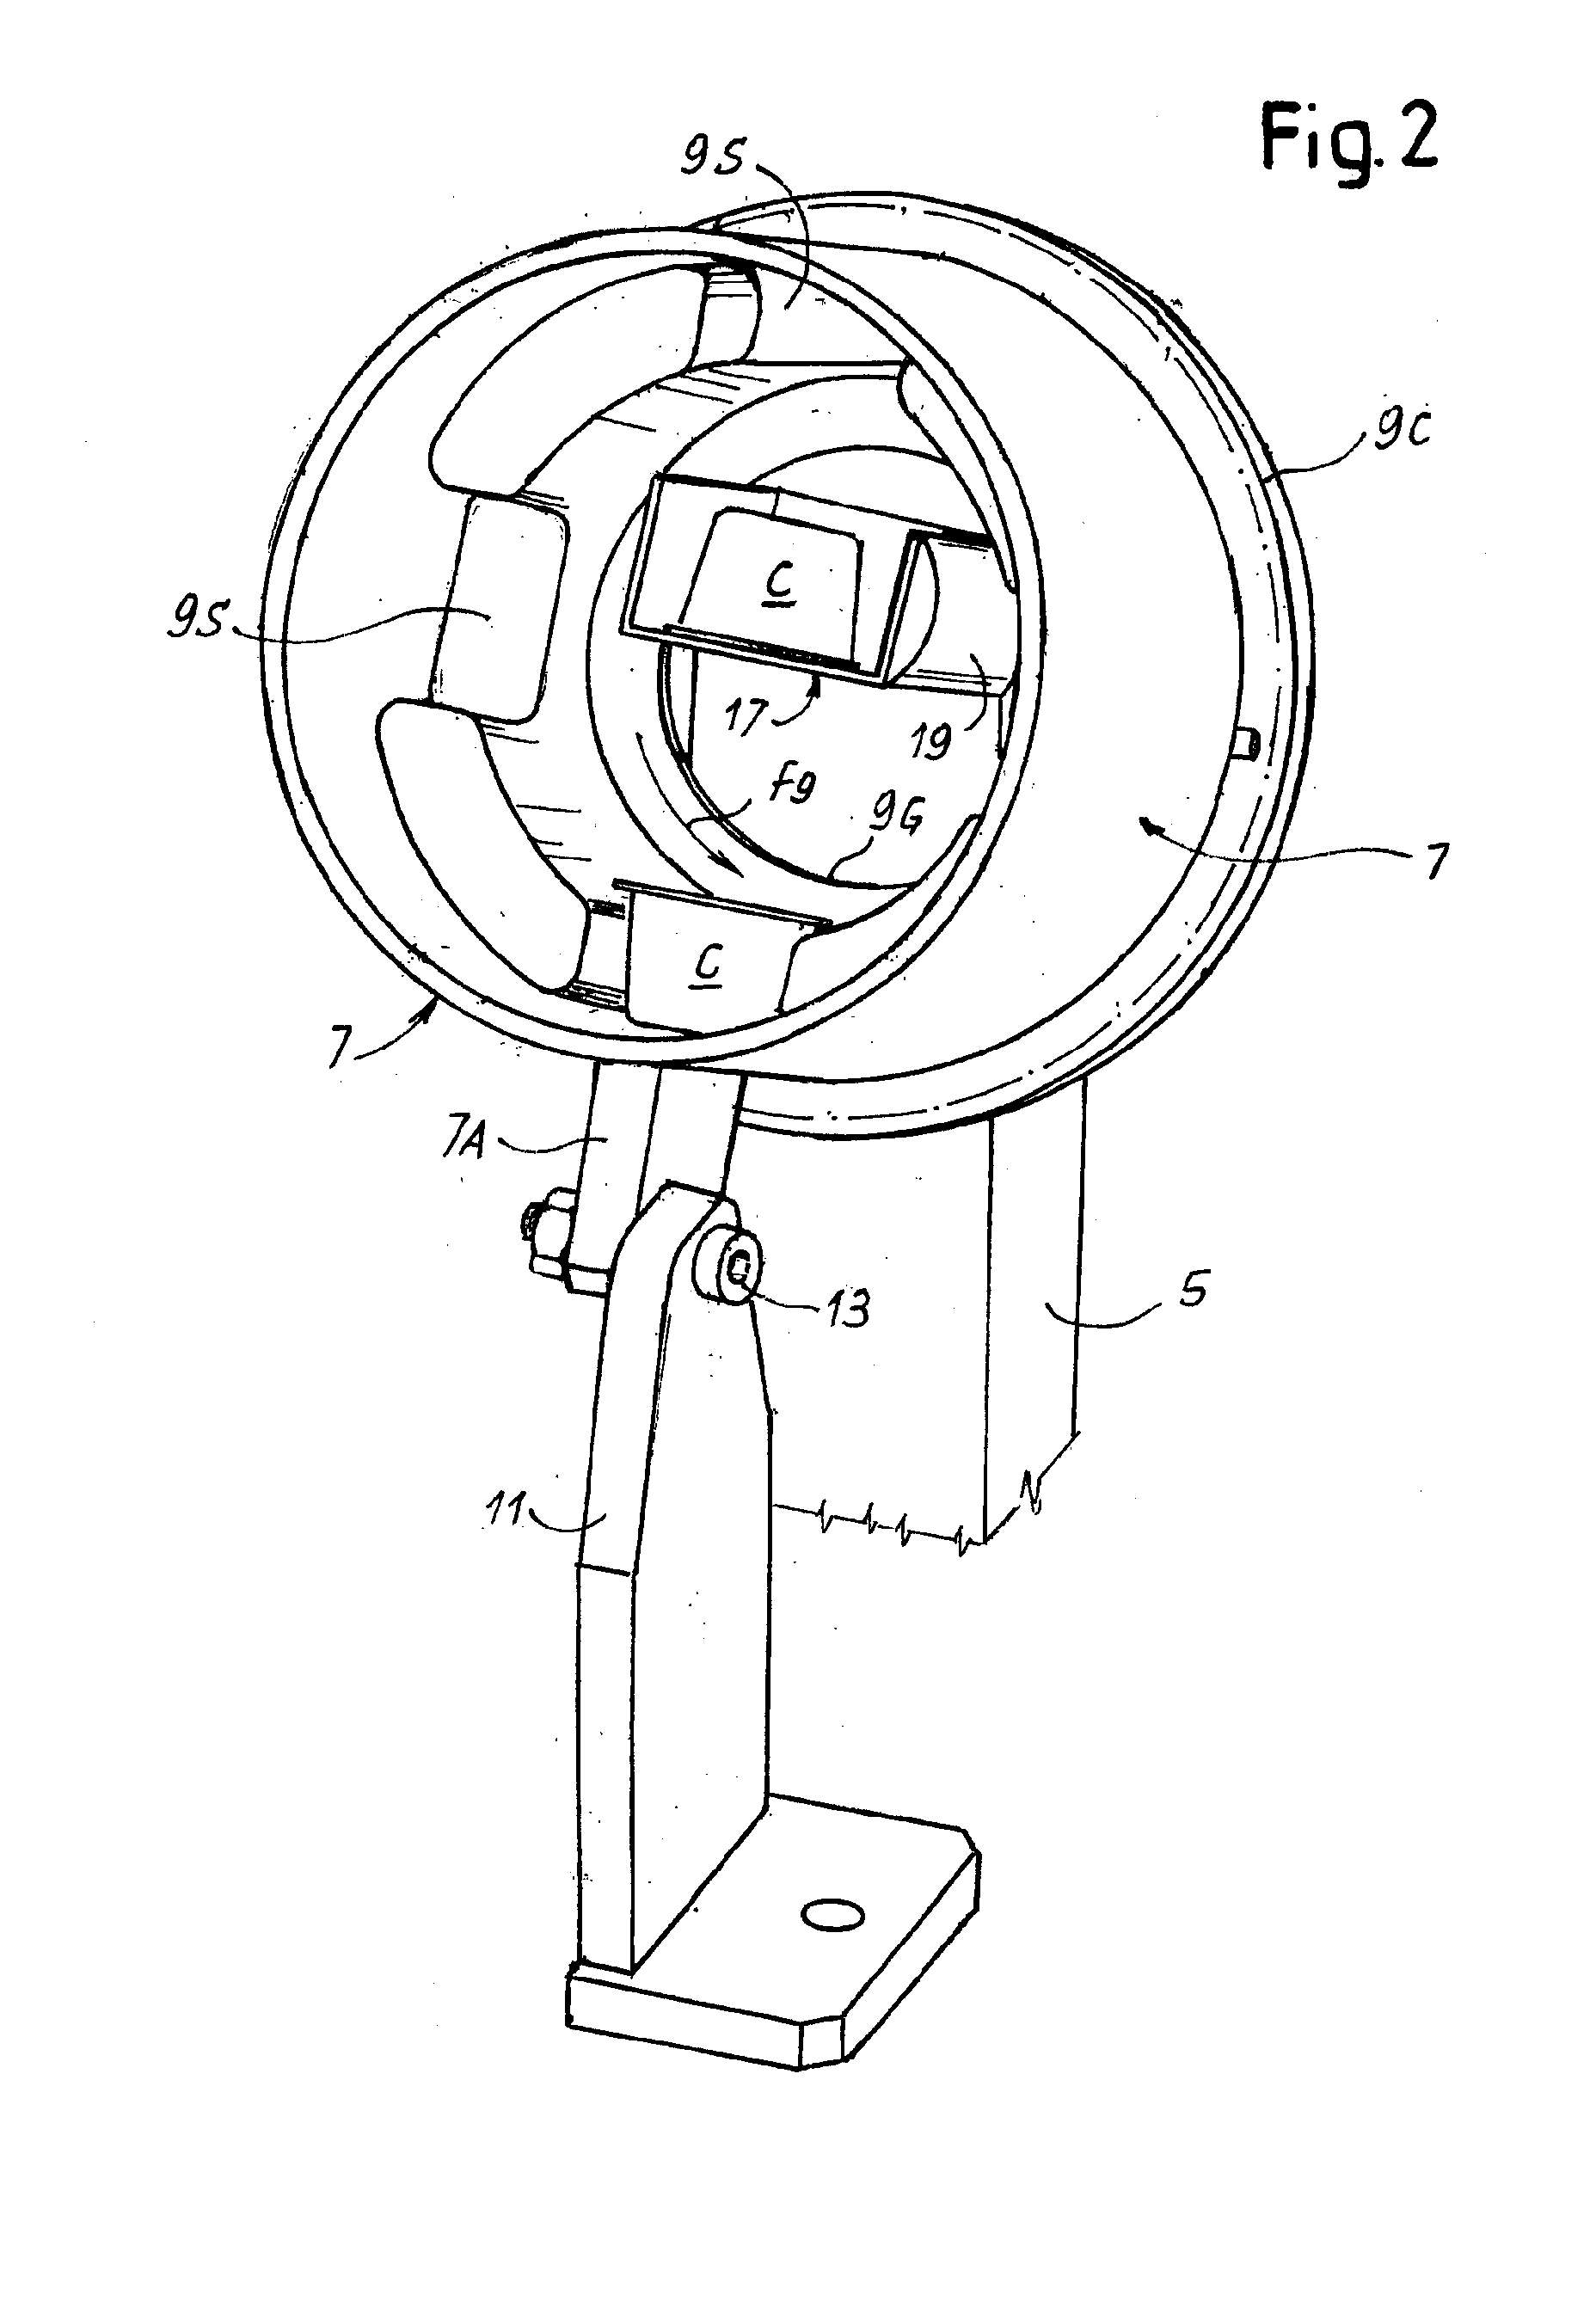 Device for orienting capsules in a beverage producing machine